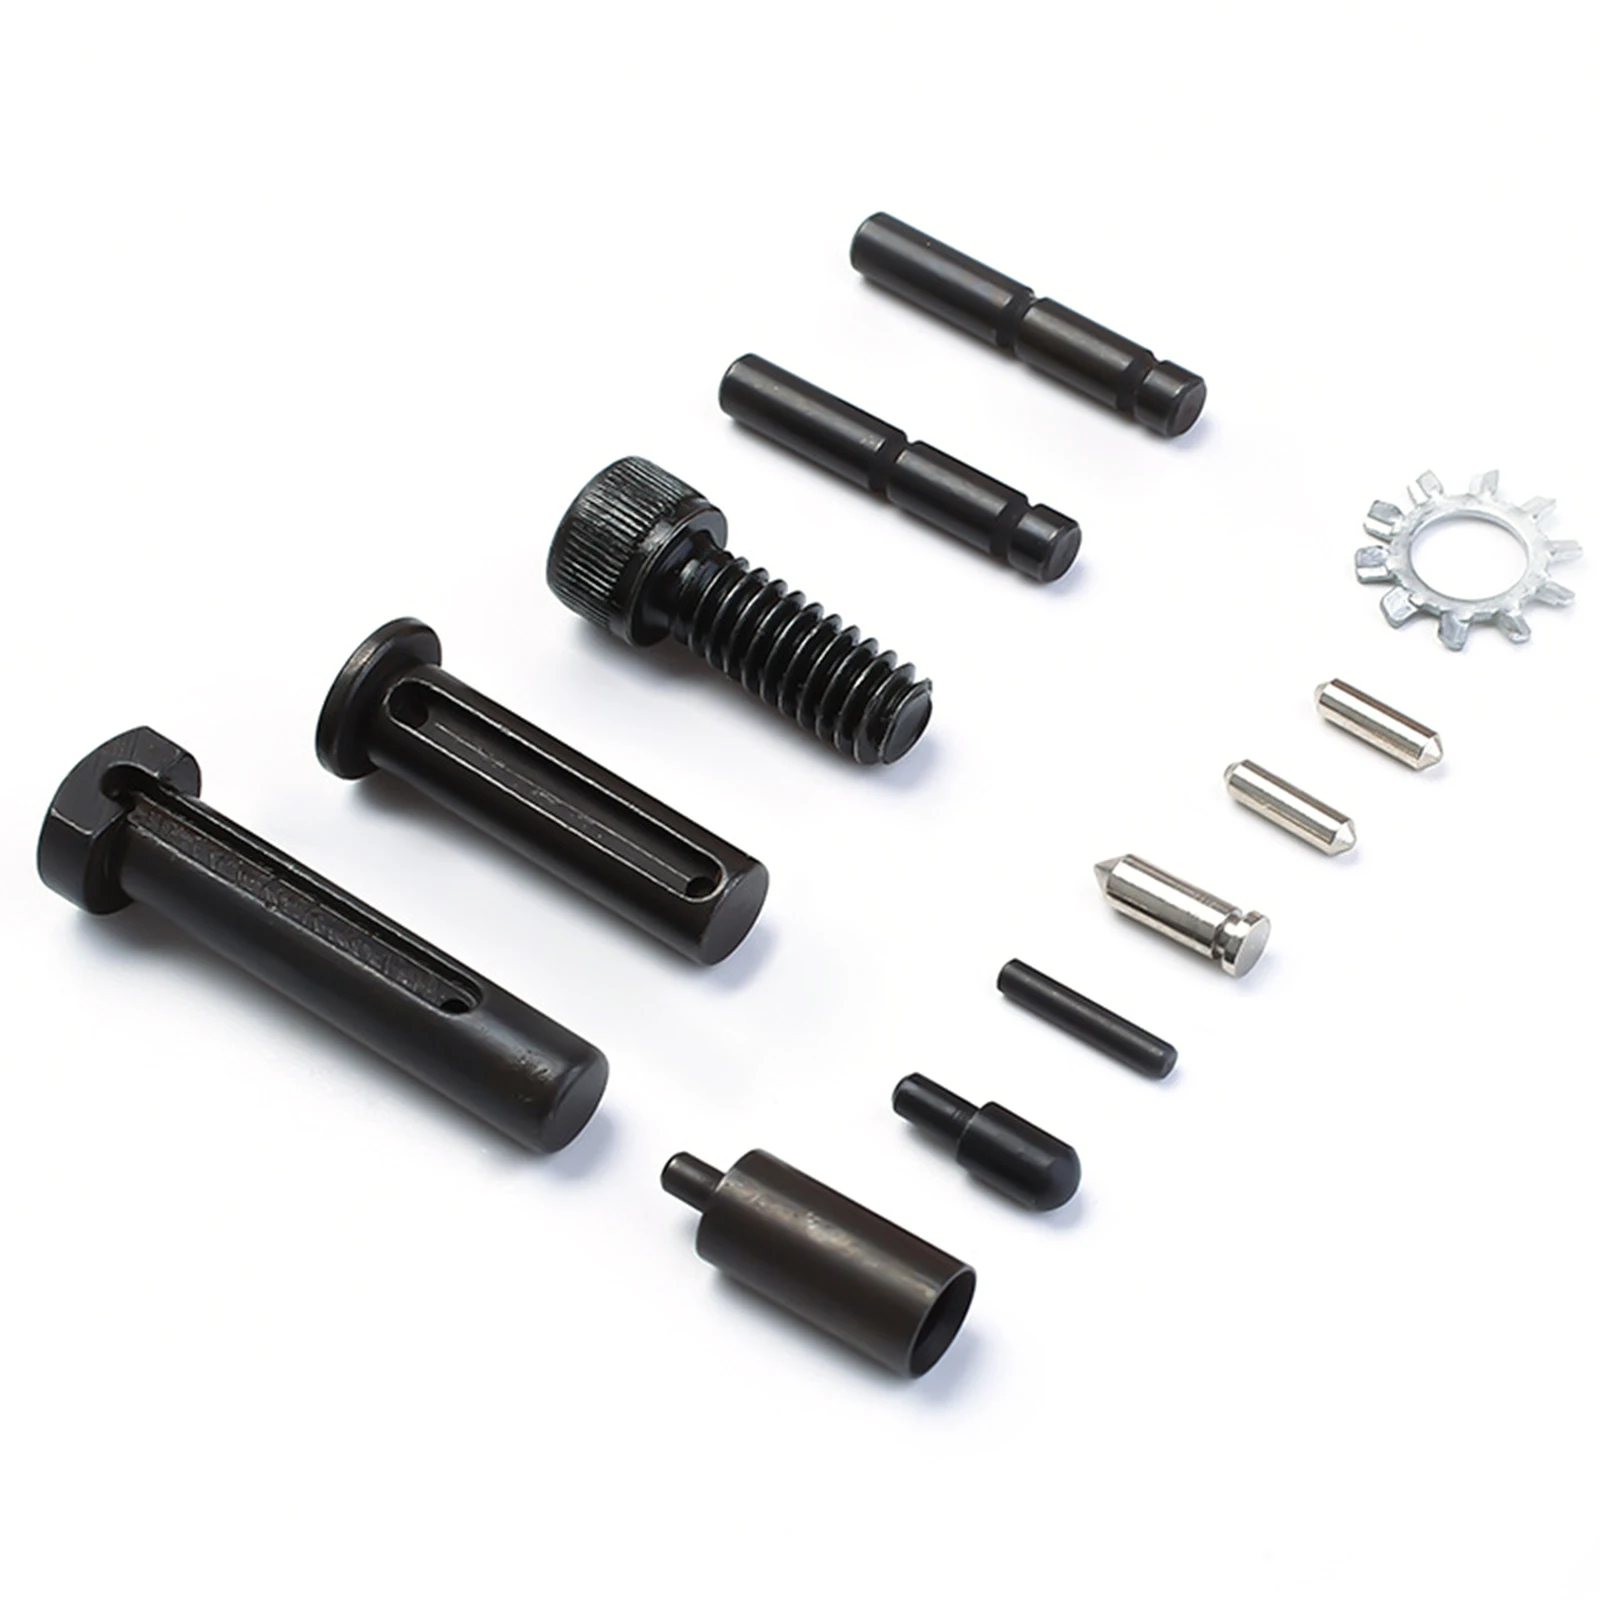 

21pcs /set AR15 whole Lower Pins, Springs and Detents .223 5.56 and magazine catch